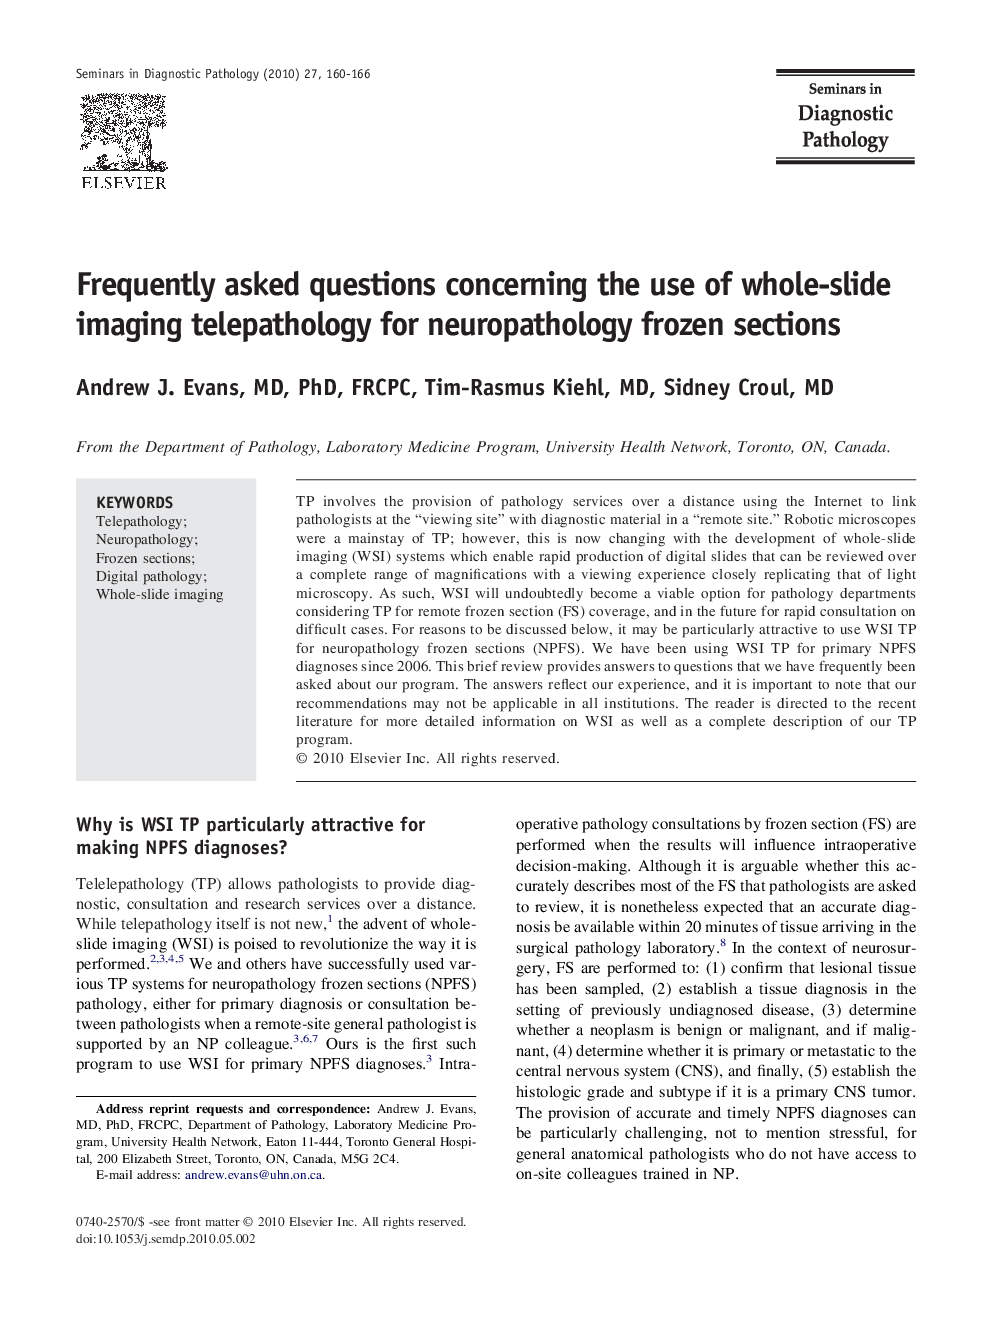 Frequently asked questions concerning the use of whole-slide imaging telepathology for neuropathology frozen sections